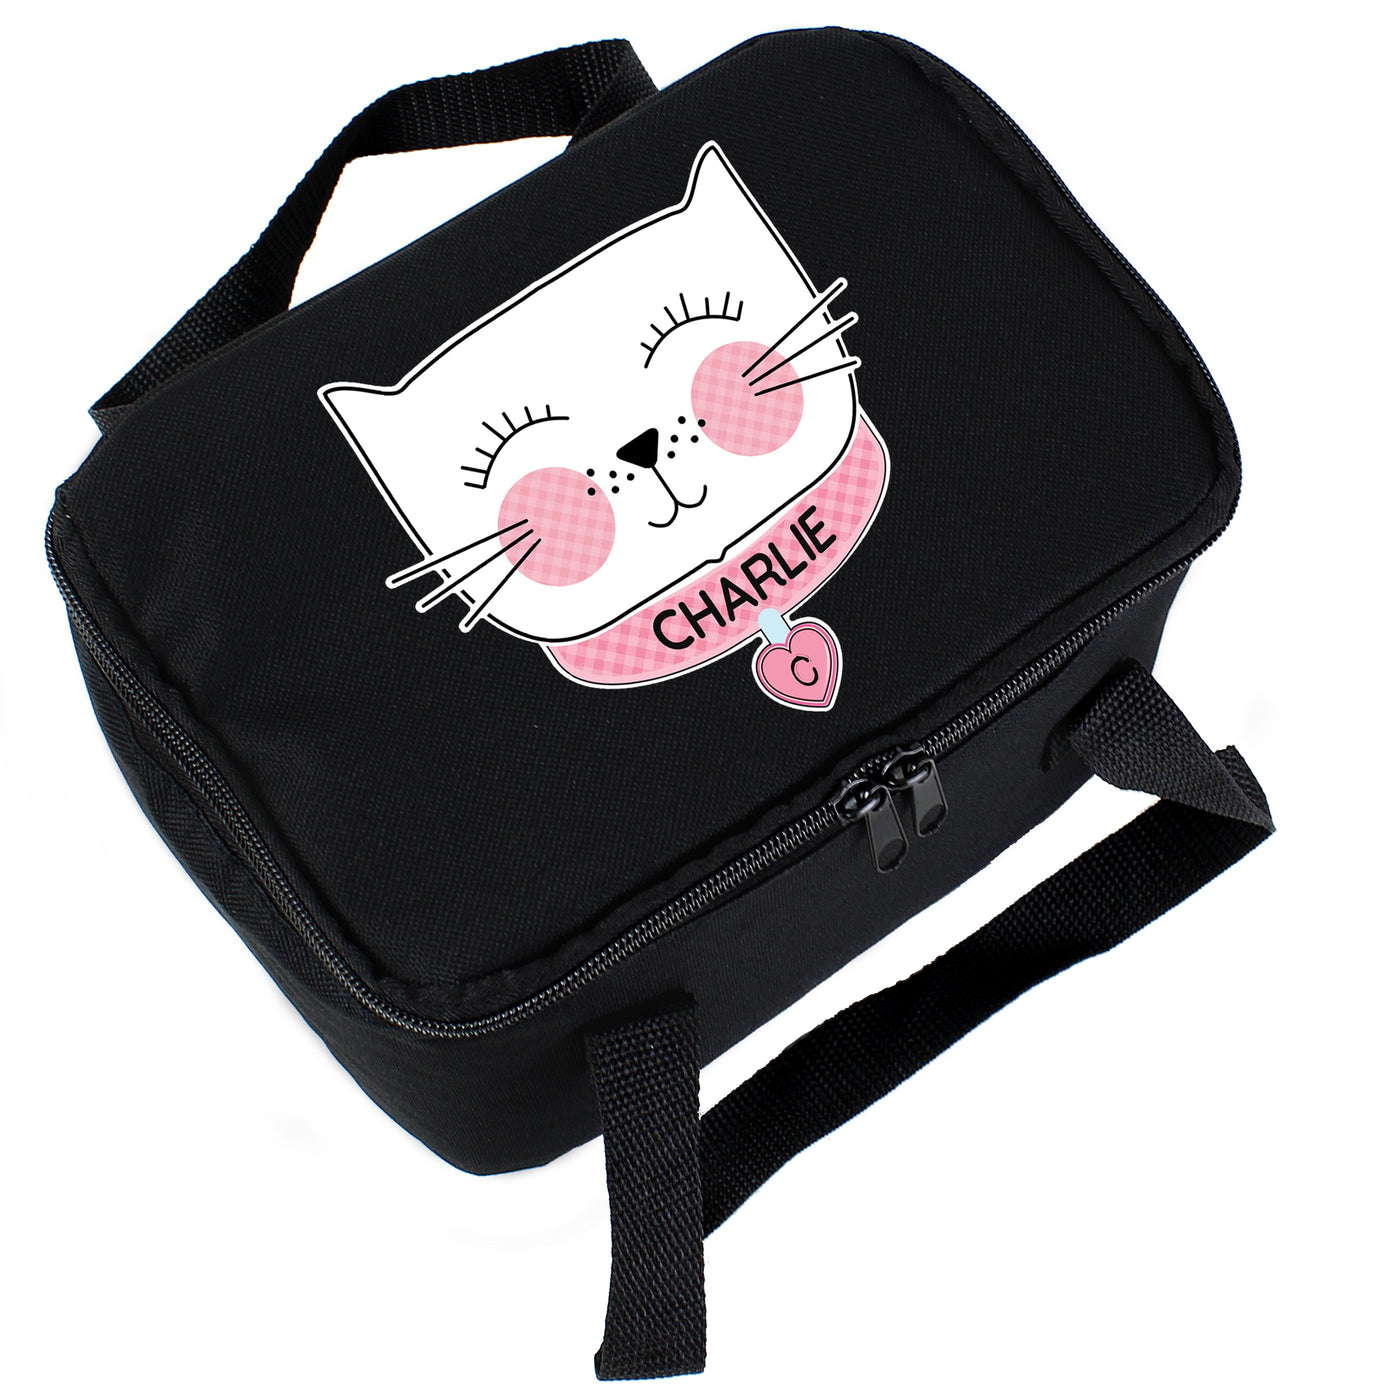 Personalised Cute Cat Black Insulated Lunch Bag - Shop Personalised Gifts